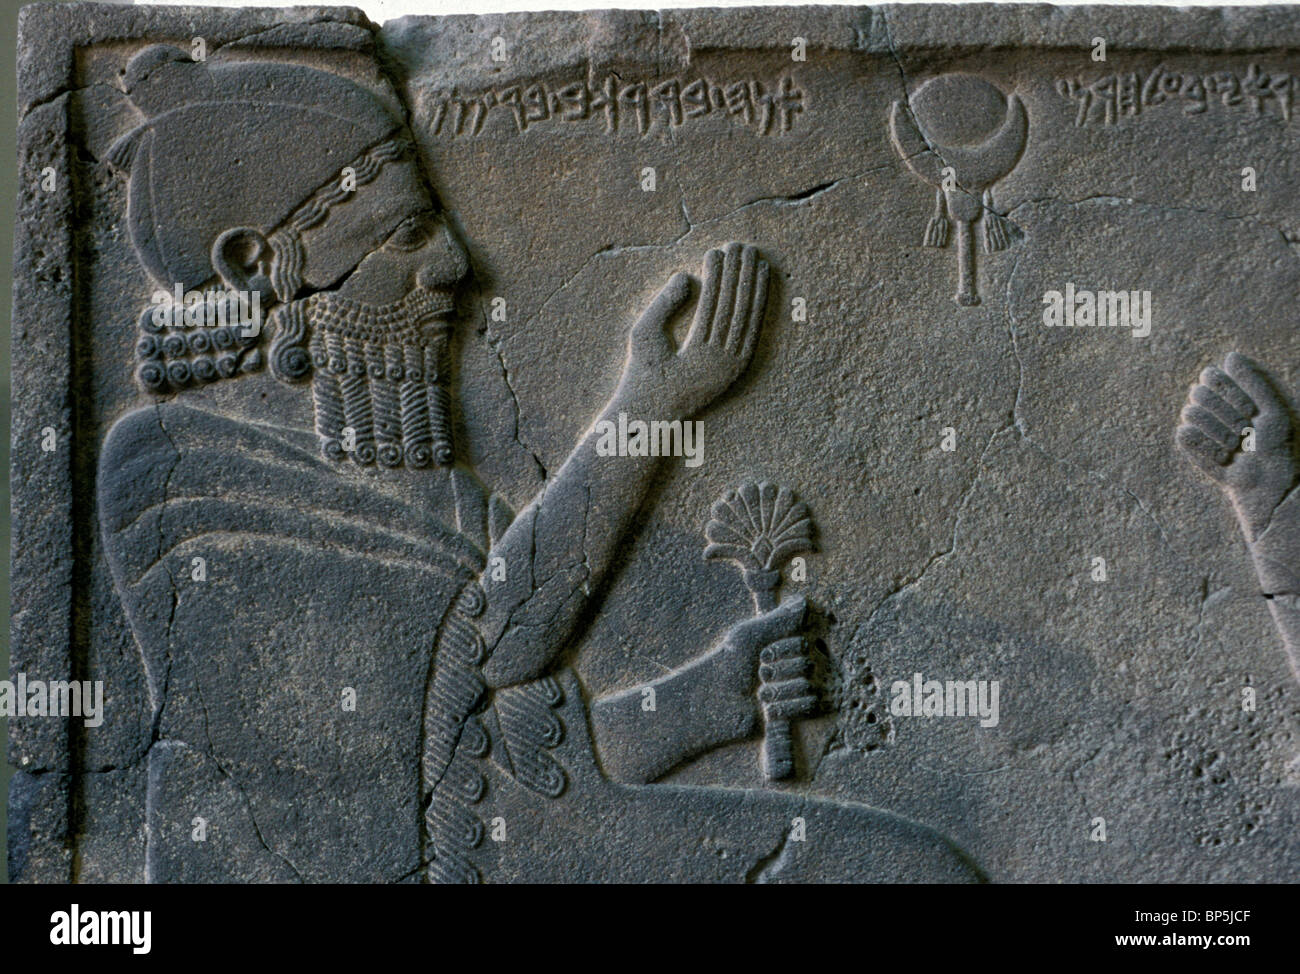 ORTHOSTAT RELIEF OF KING BARREKUB FROM ZINJIRLI DATING FROM C. 750 BC. THE KING IS SEATED ON A SPLENDIDLY DECORATED THRONE A Stock Photo